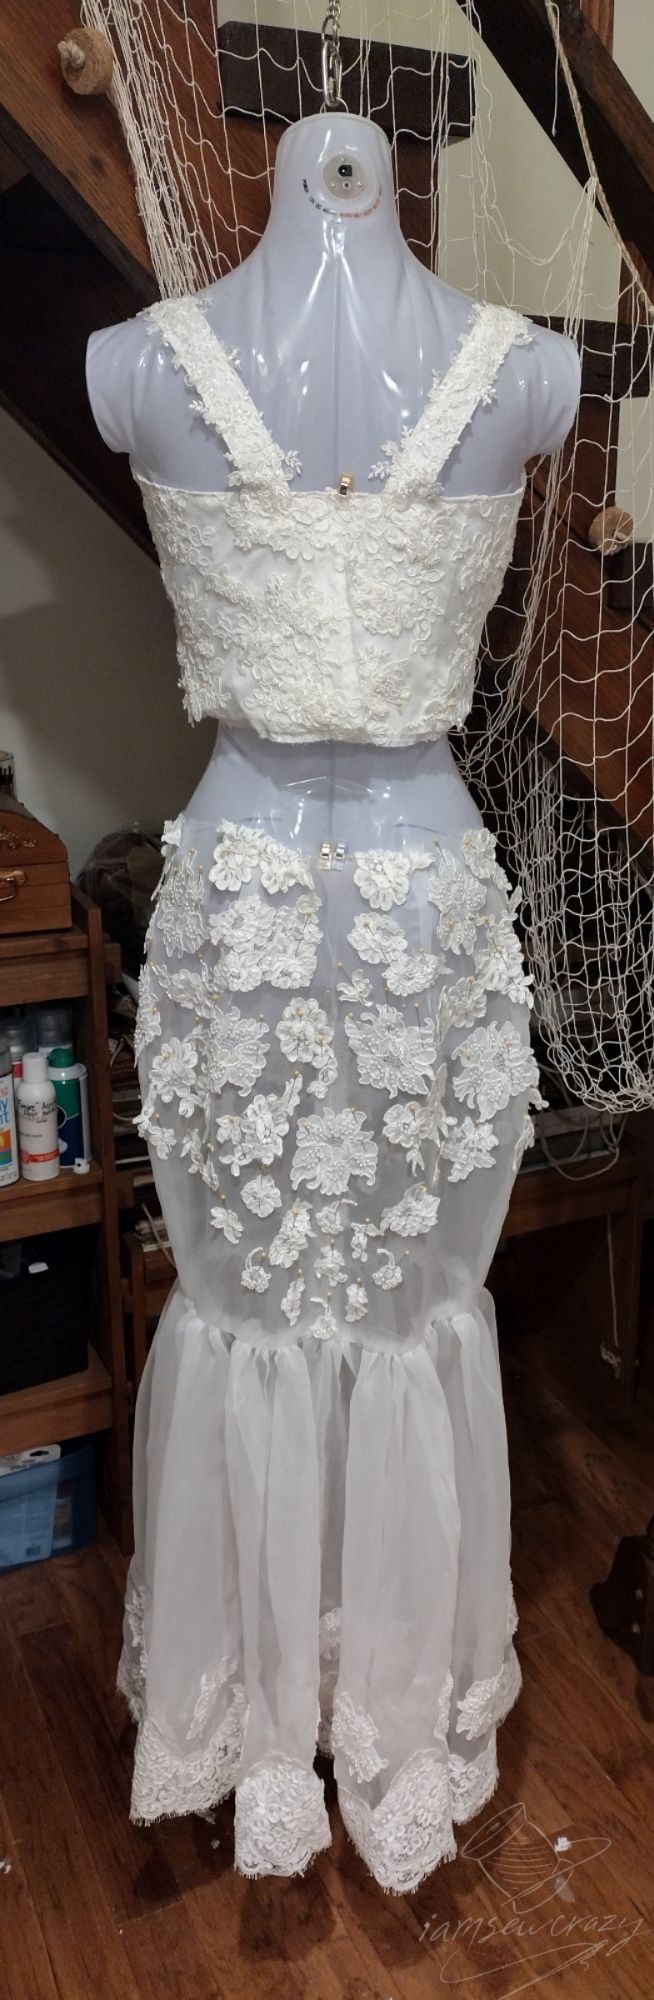 designing a lace-covered wedding dress